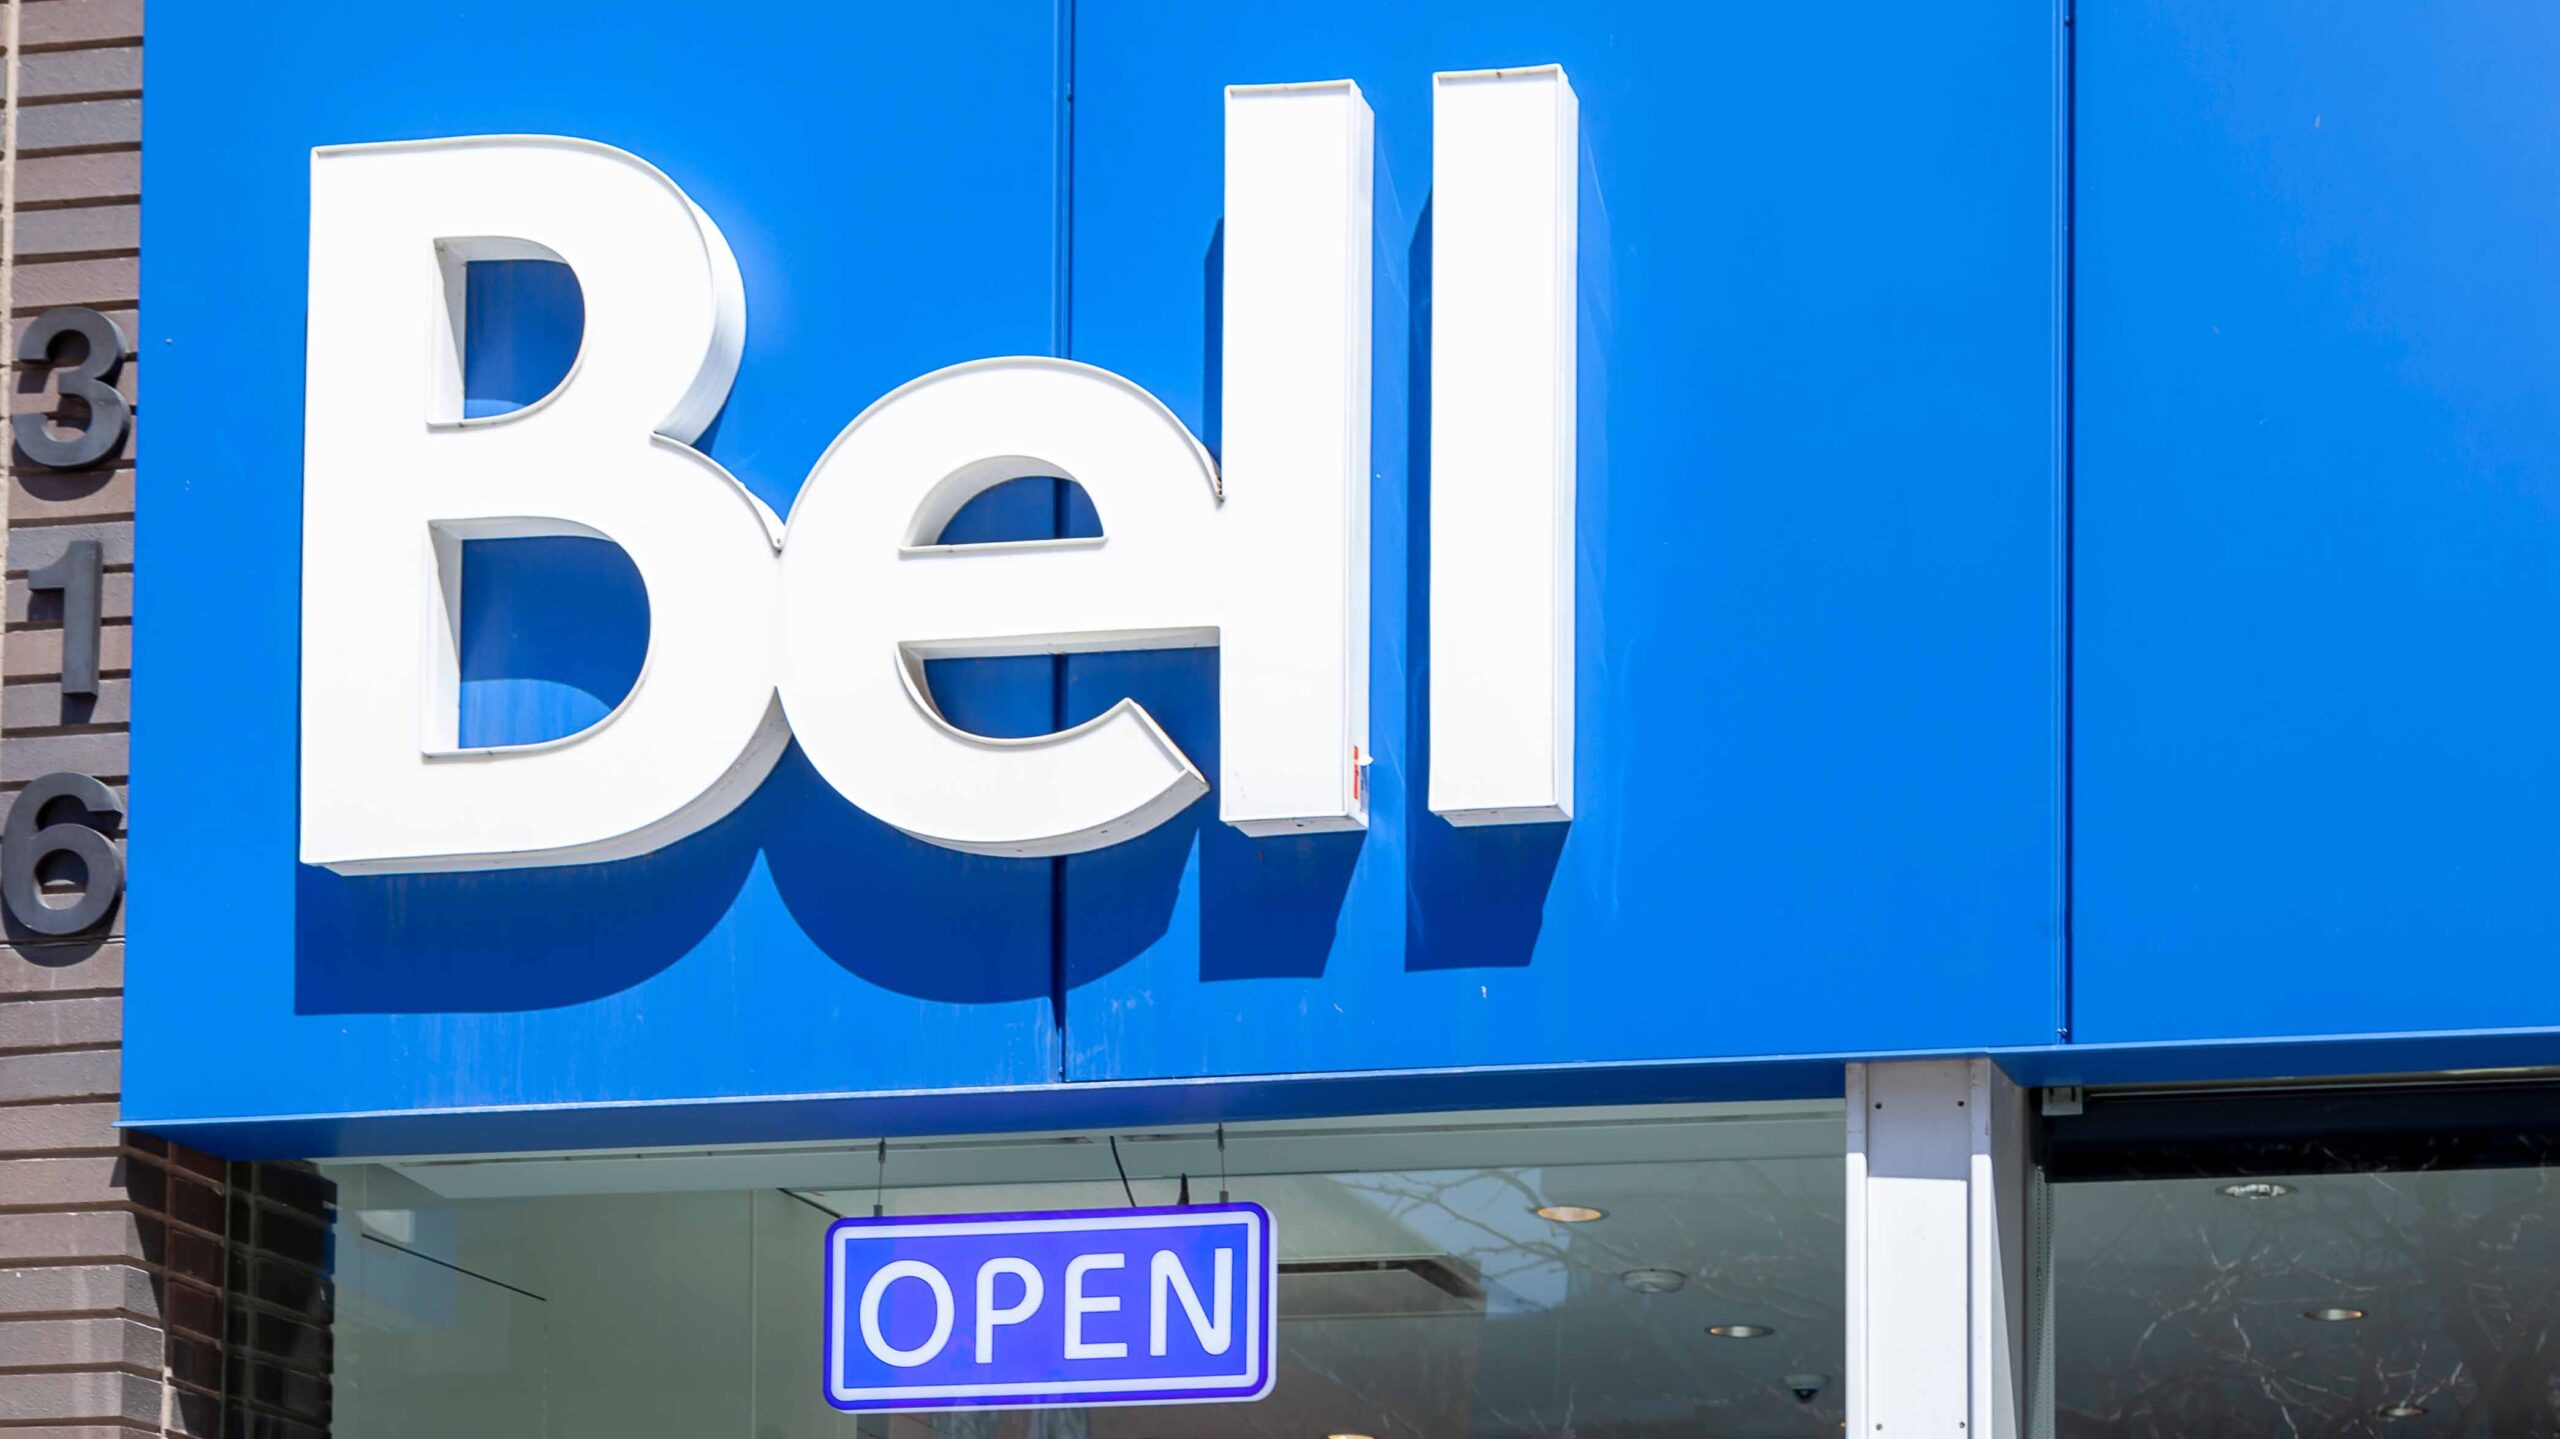 Bell wants the federal government to rescind CRTC’s fibre internet order